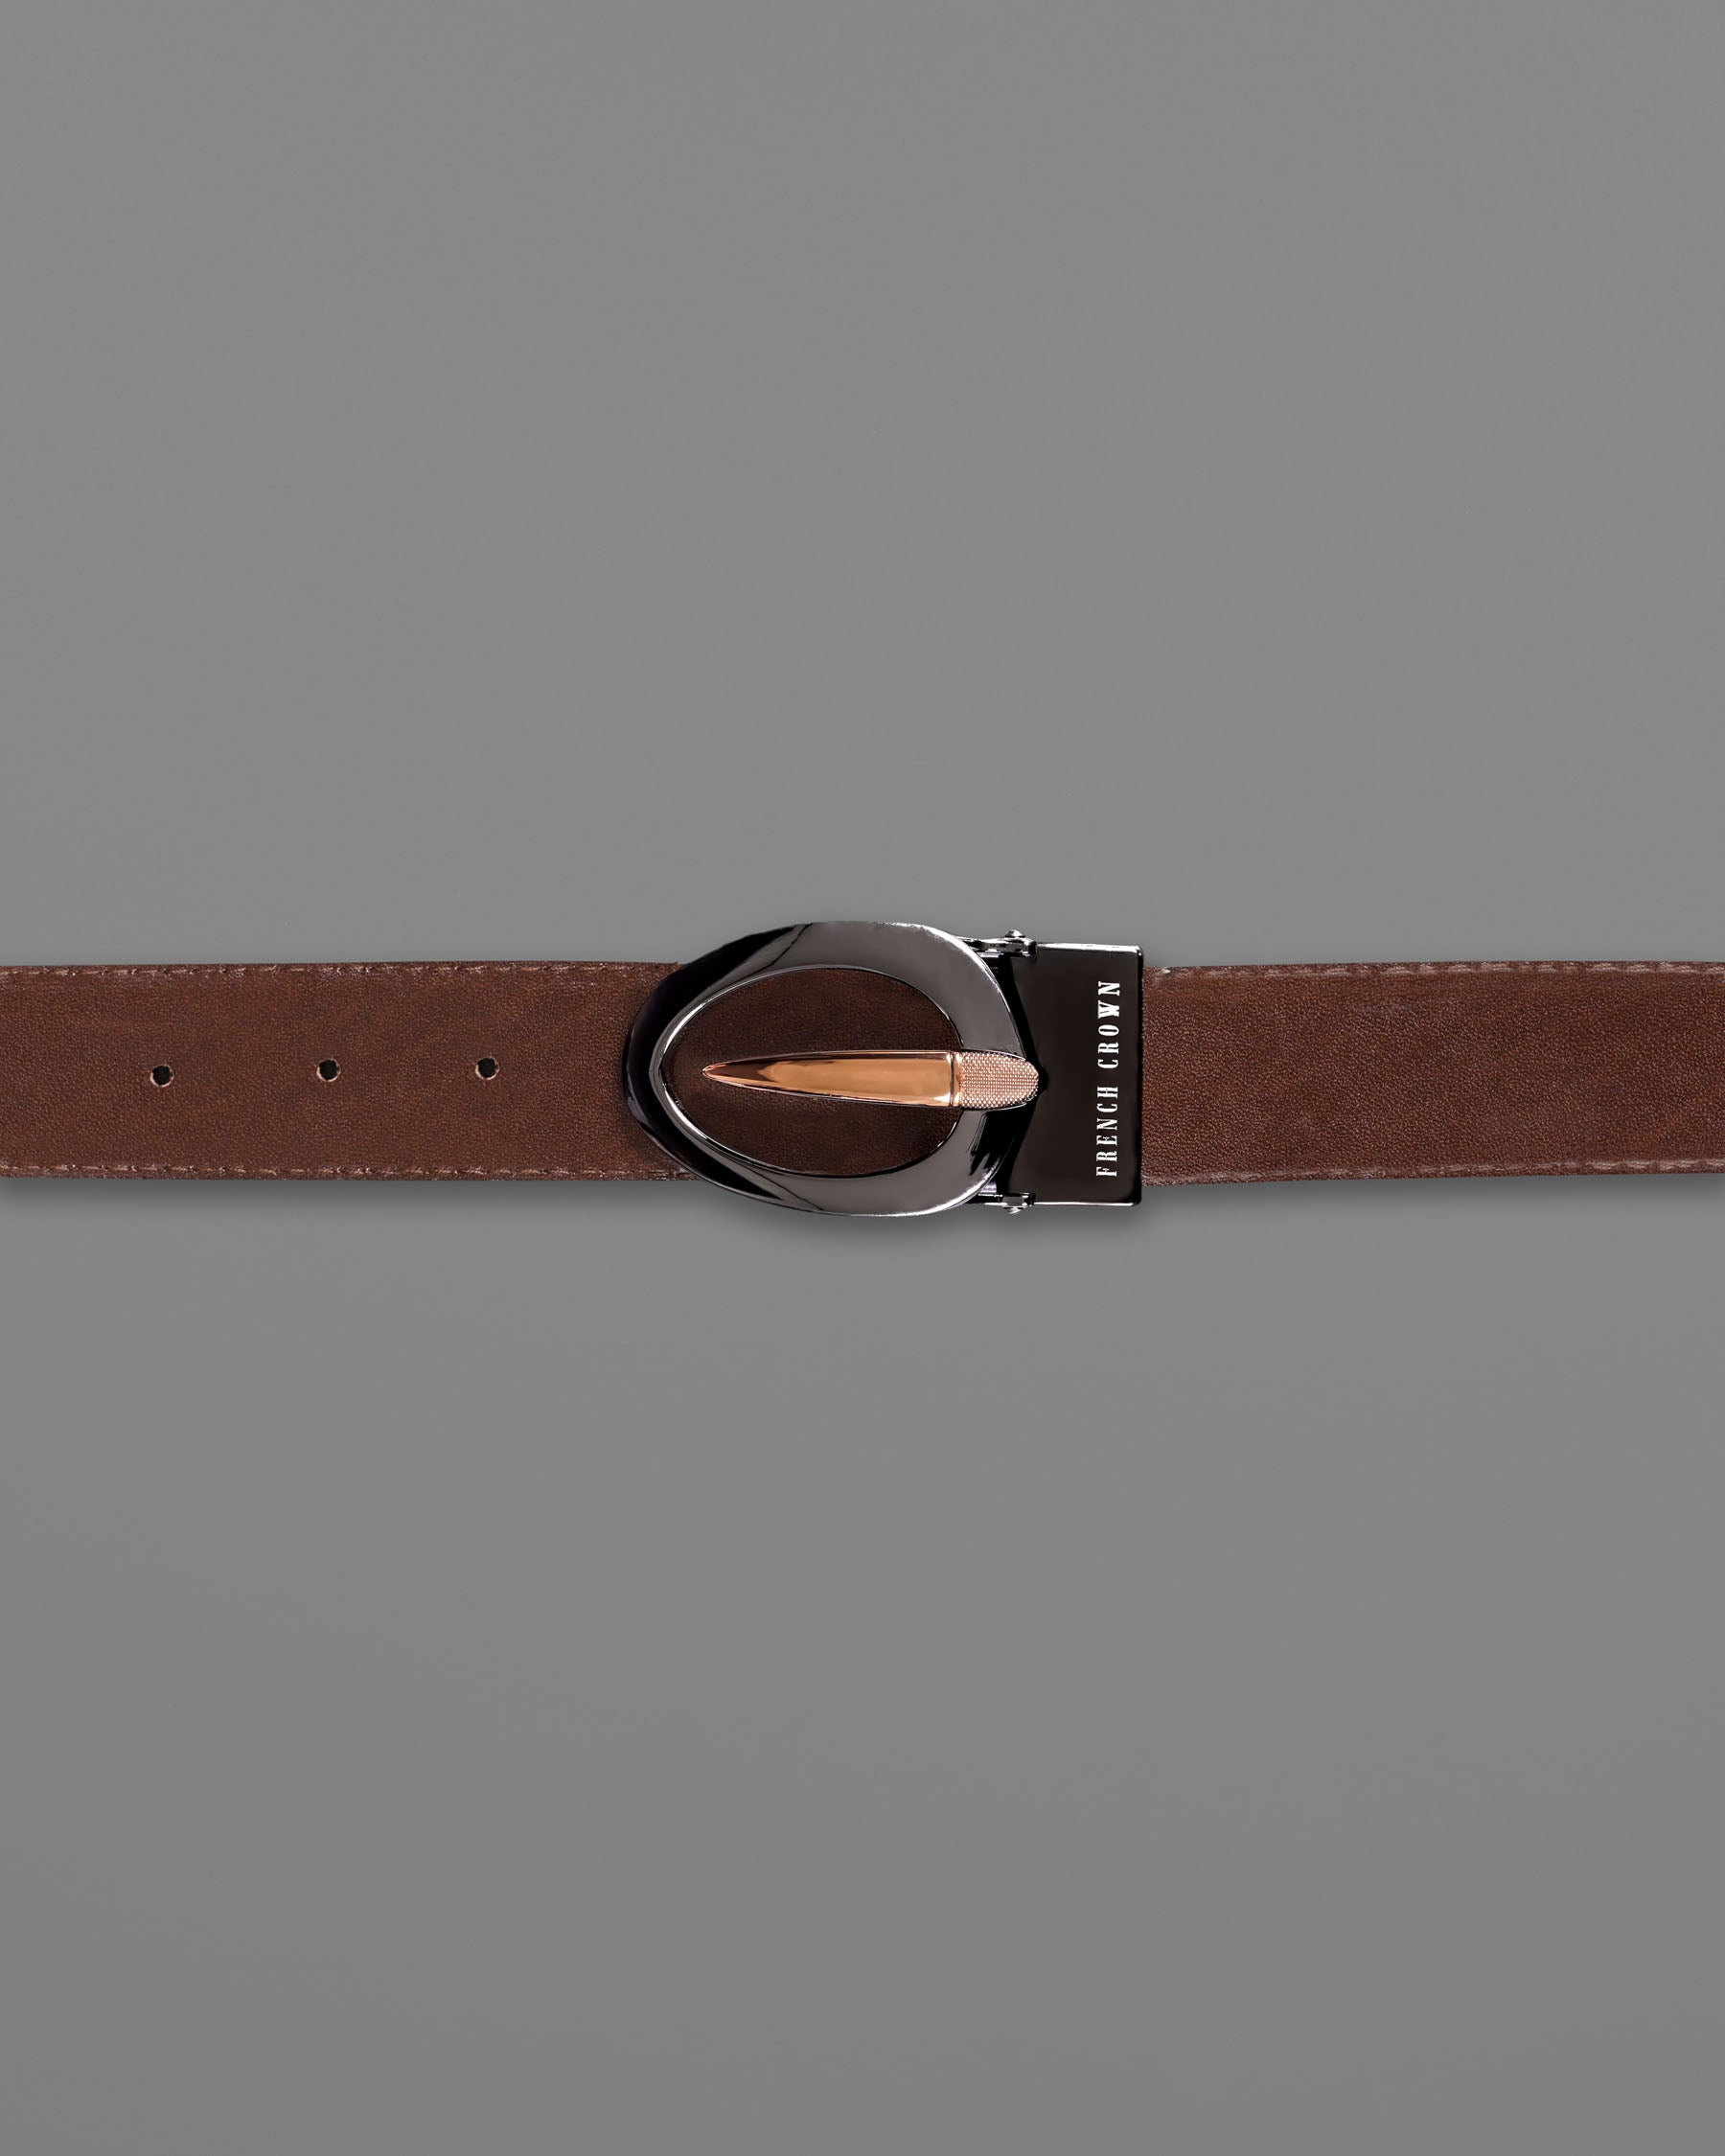 Glossy Grey and Golden Oval  buckled Reversible jade Black and tan Slight Textured Vegan Leather Handcrafted Belt